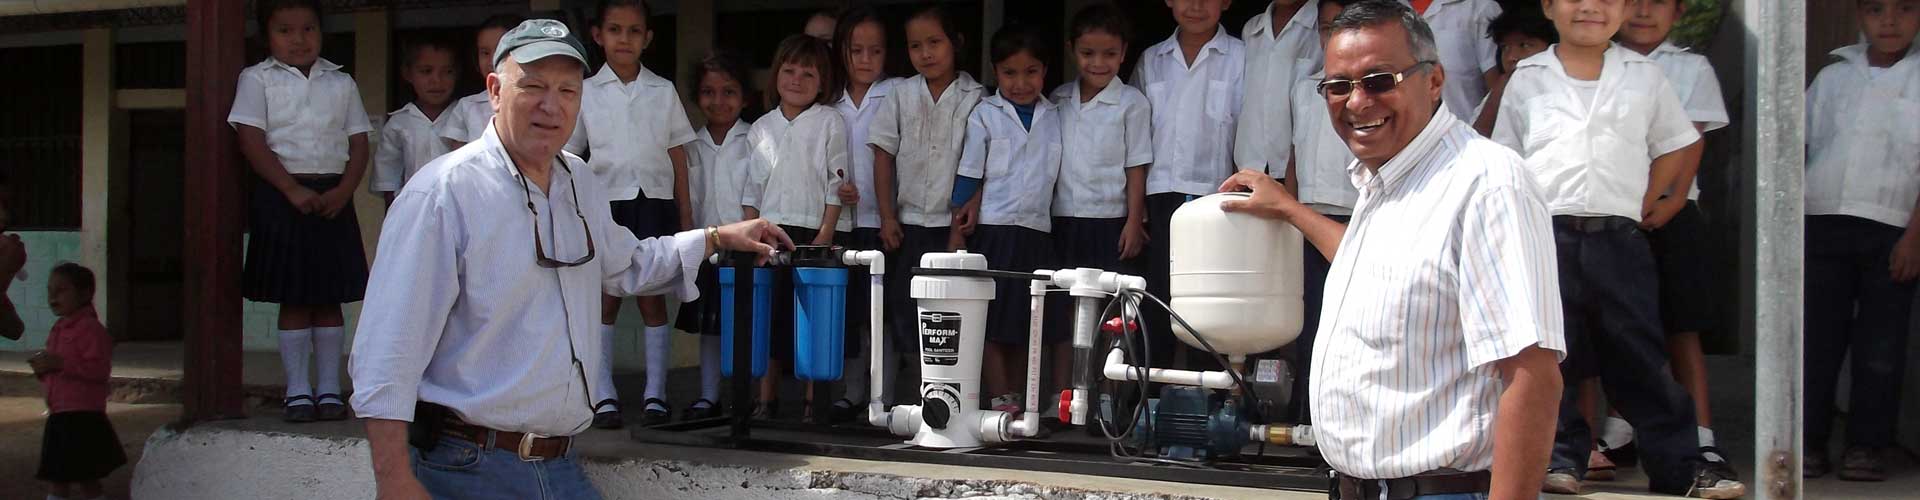 A Low-Cost/Low-Tech System for Water Purification & Filtration